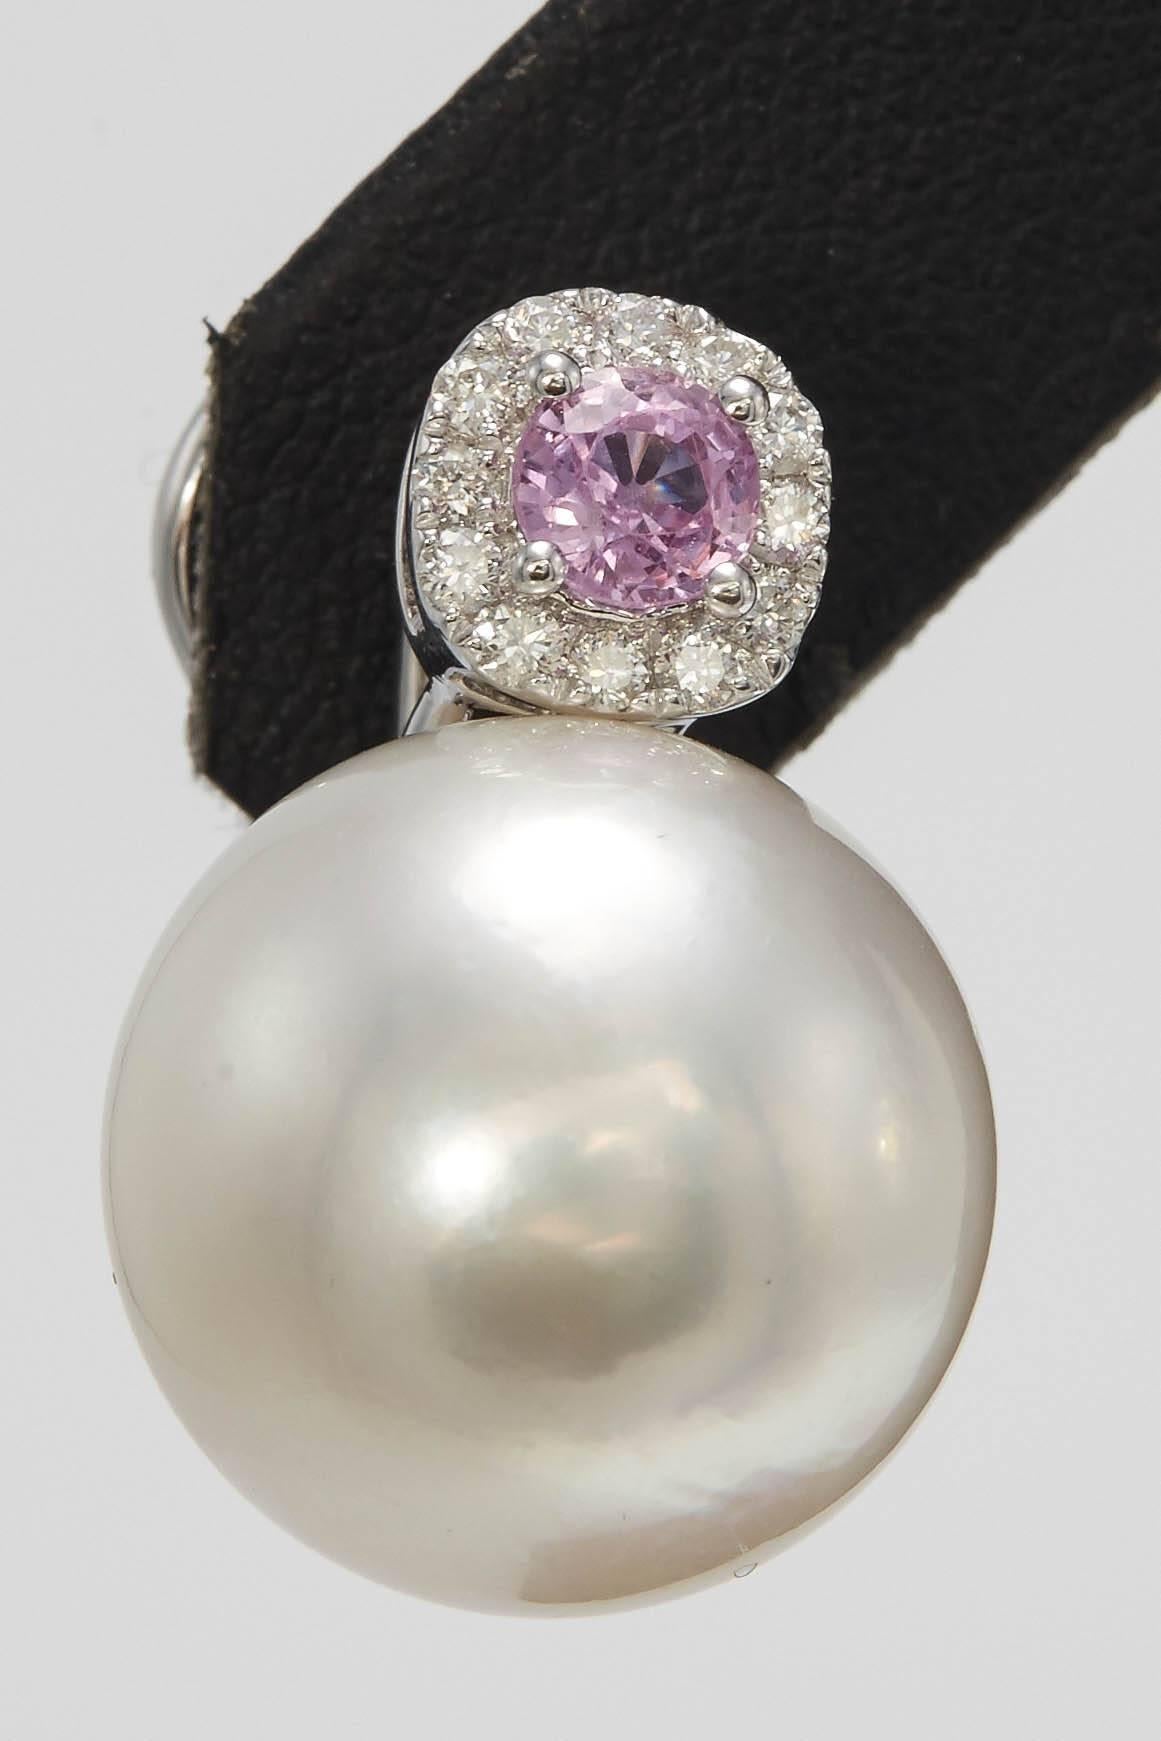 18K white gold
South Sea Pearl 14-15mm 
Diamonds: 0.24 Cts
Pink Sapphire 0.65 Cts,
5g.